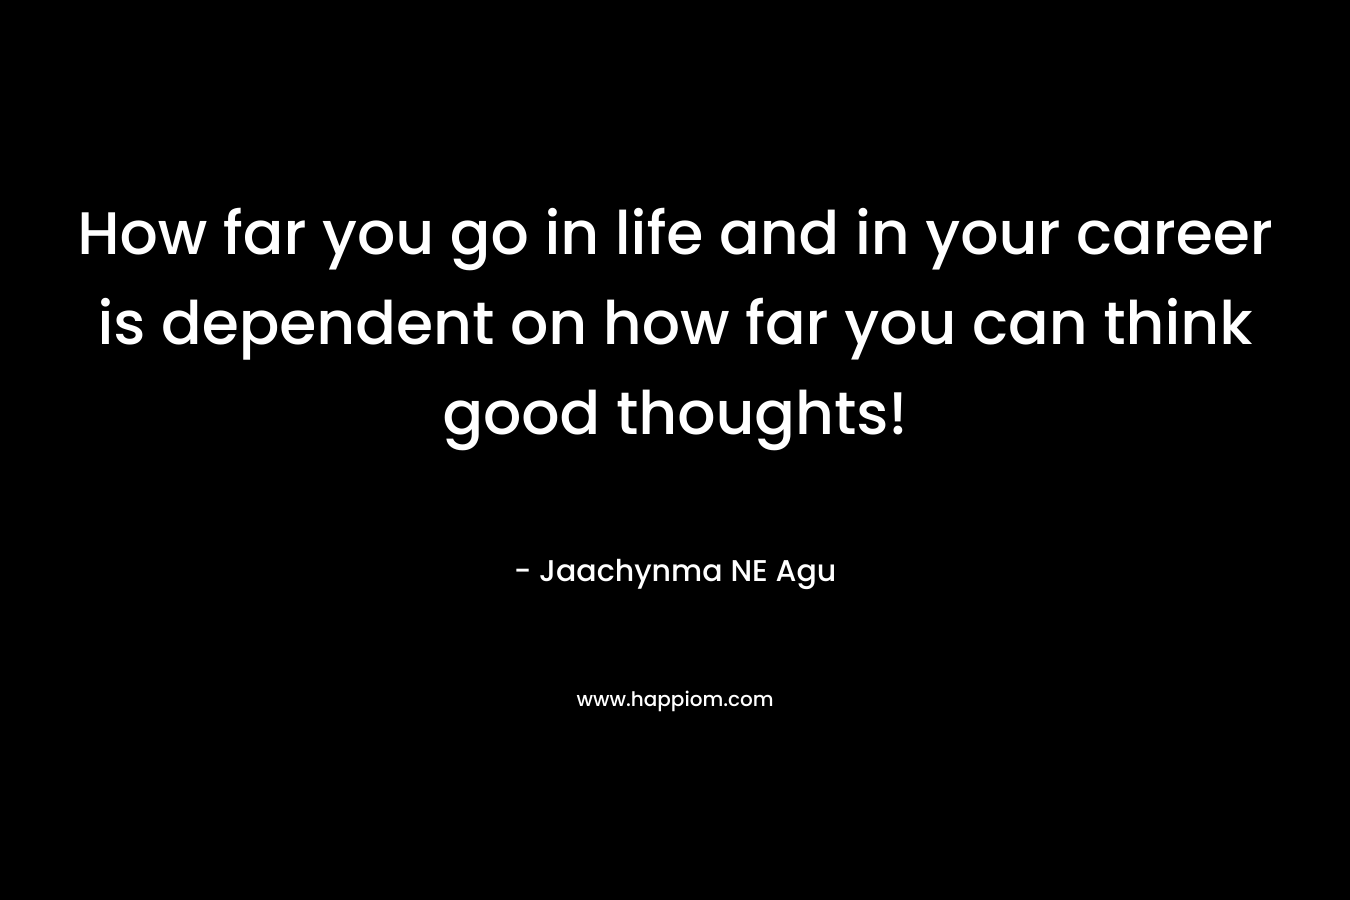 How far you go in life and in your career is dependent on how far you can think good thoughts!